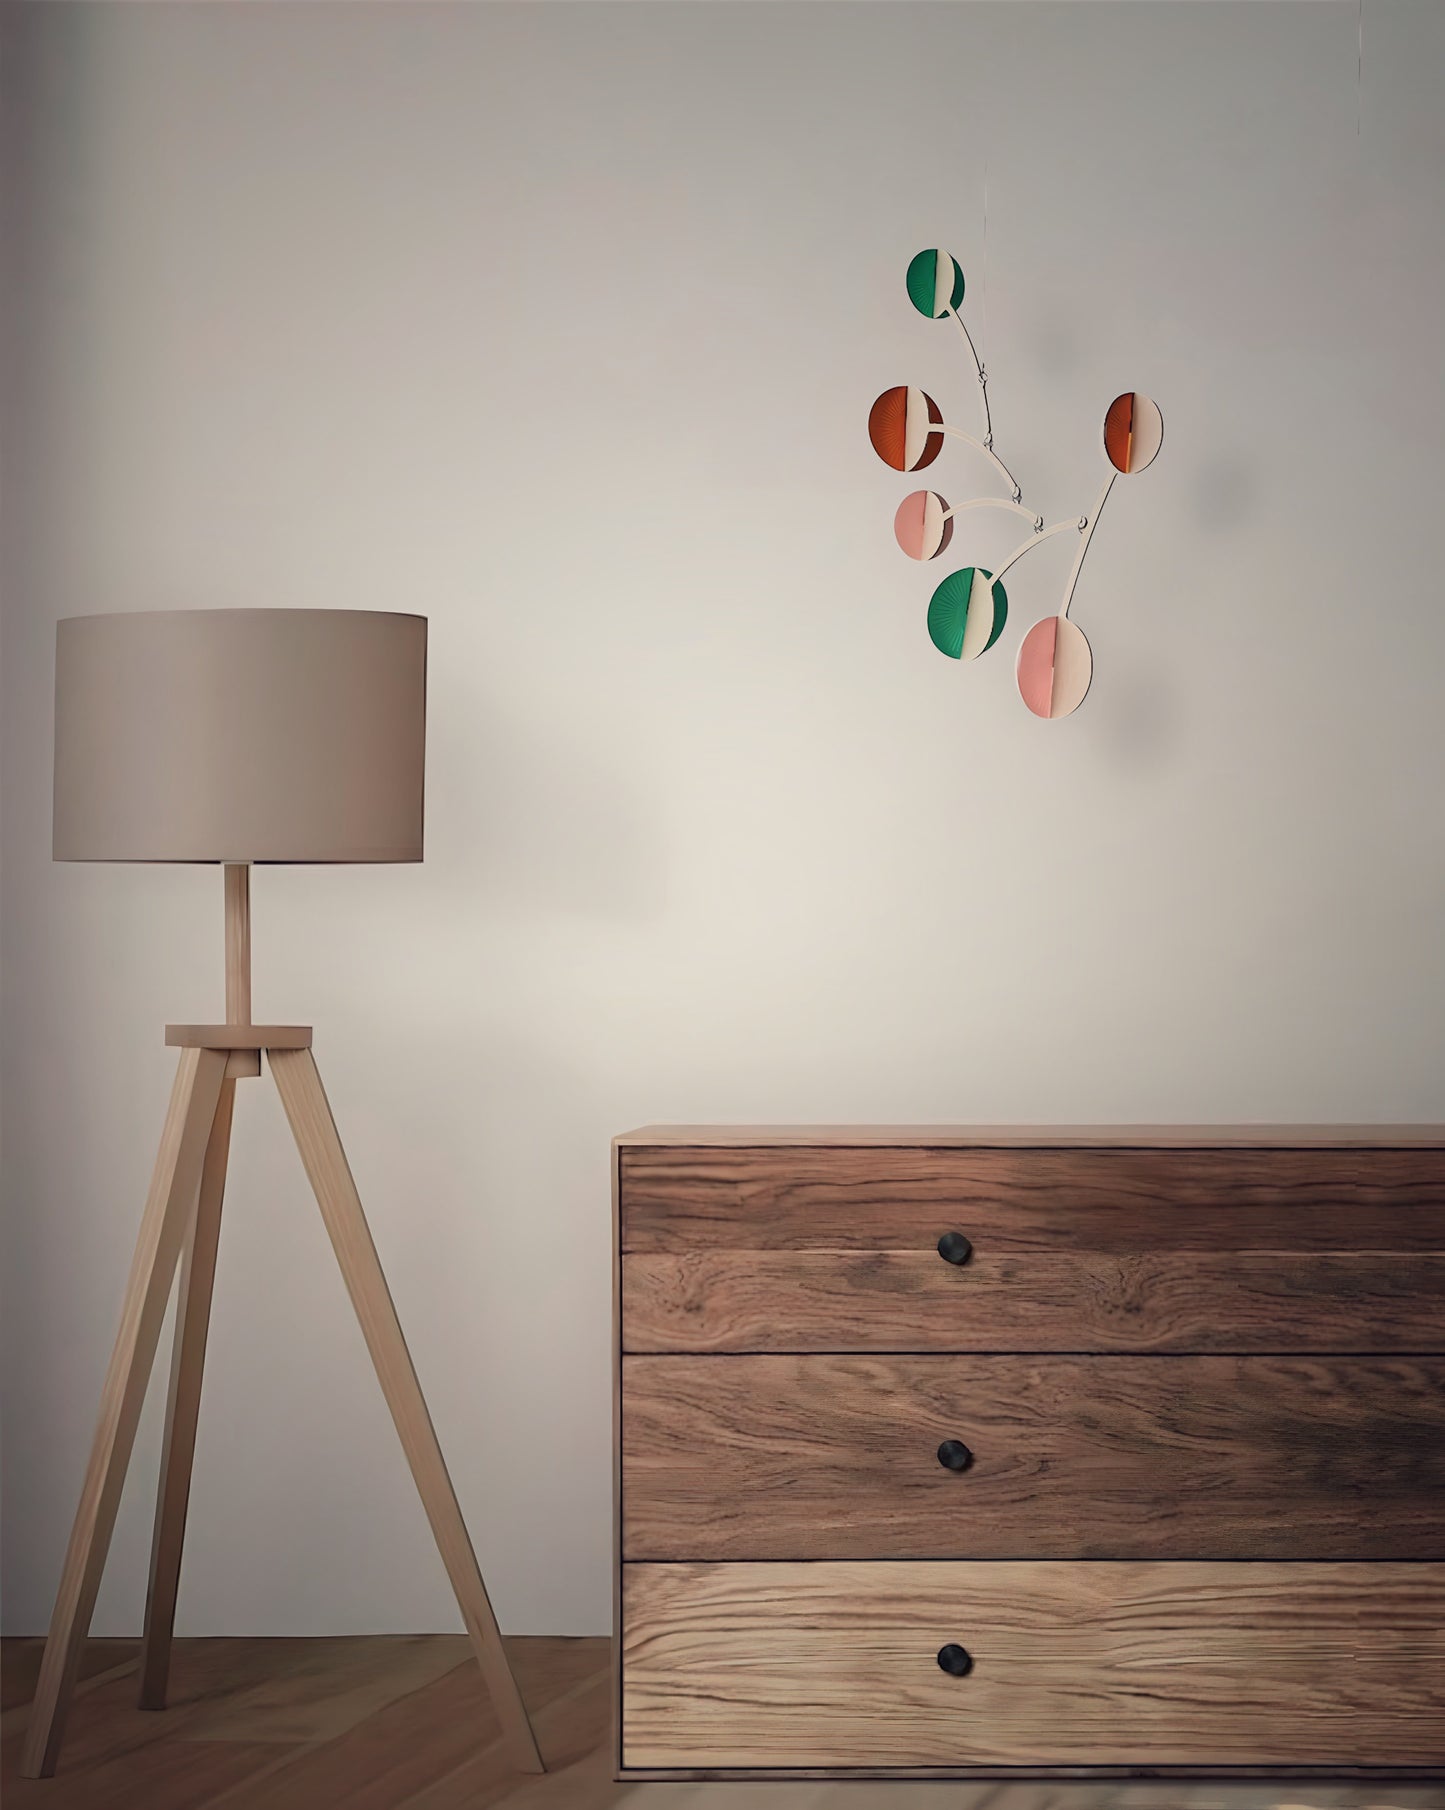 Blush mobile, Pink mobile, Green Mobile, Orange Mobile,wooden mobile, handmade mobile. Calder mobile, mobile and Baby mobile. Moon Mobile, vintage mobile and kinetic mobile. Abstract Art, Hanging Mobile and Kinetic Mobile. Modern Mobile. Mid Century Modern and Hanging Sculpture, retro mobile